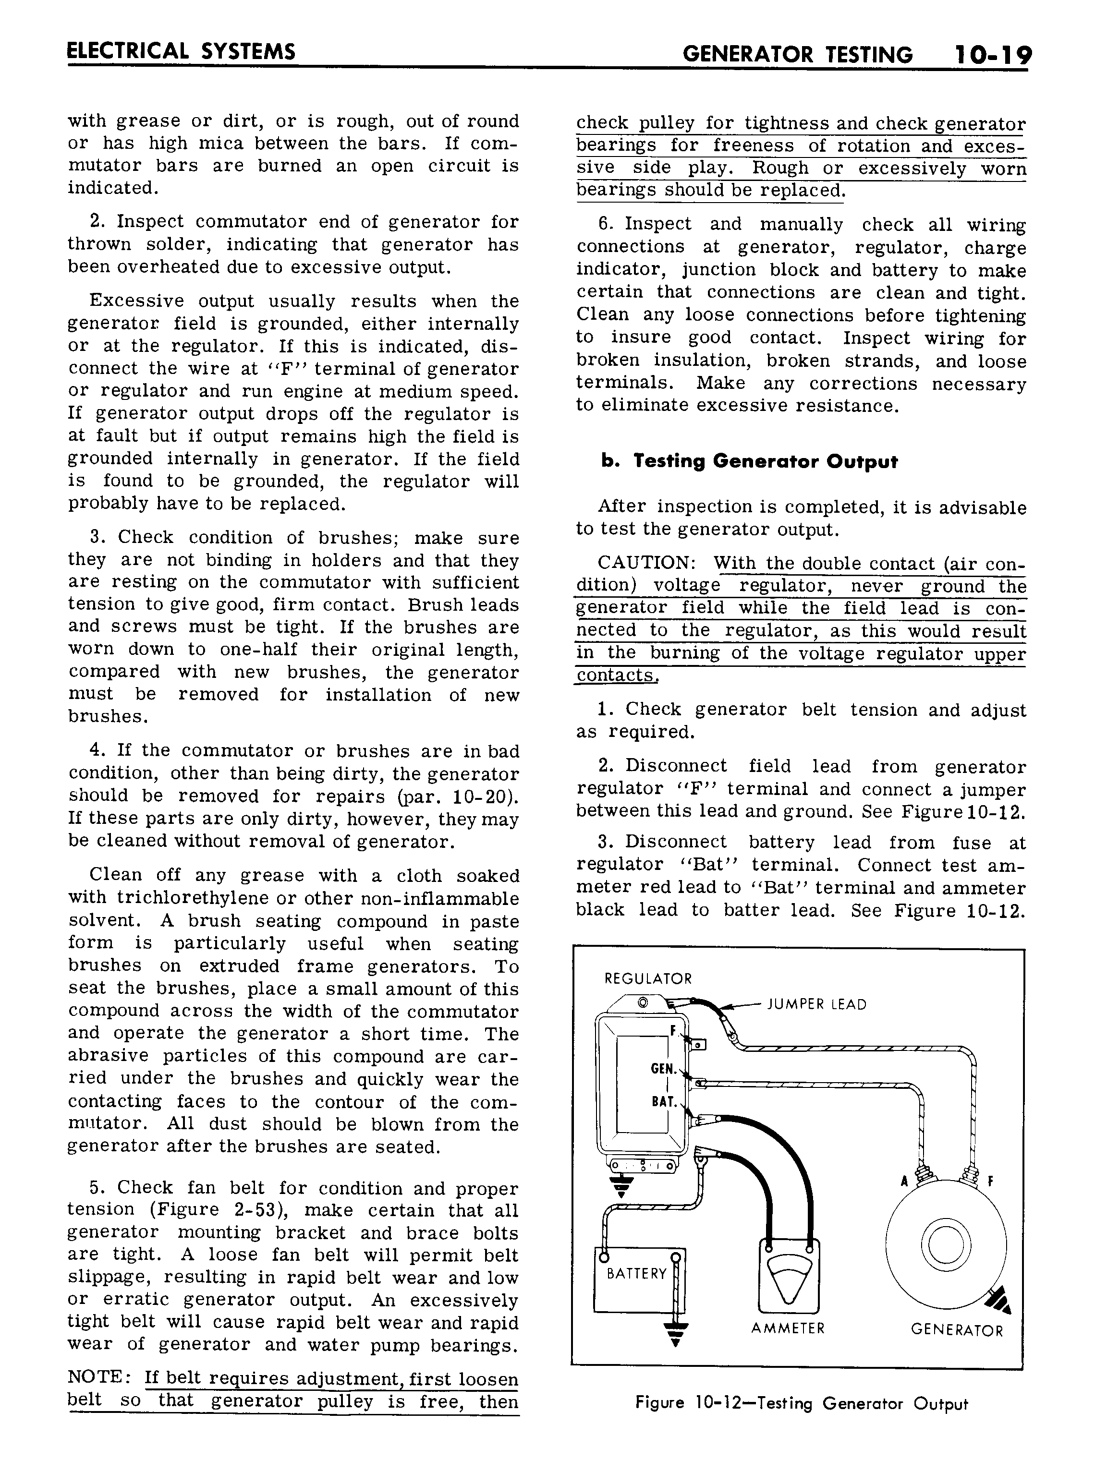 n_10 1961 Buick Shop Manual - Electrical Systems-019-019.jpg